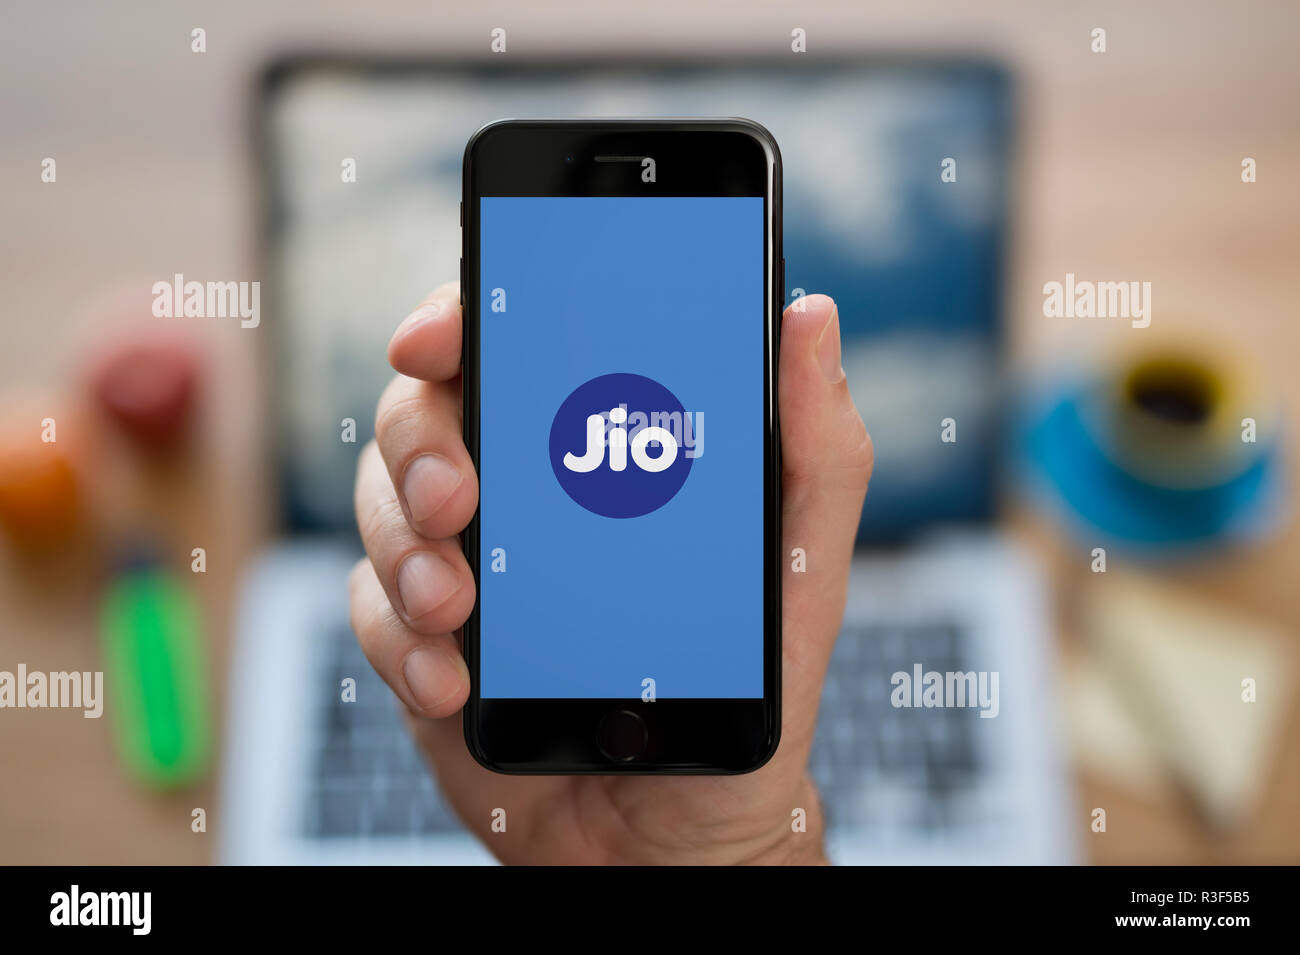 A man looks at his iPhone which displays the Reliance Jio logo, while sat at his computer desk (Editorial use only). Stock Photo